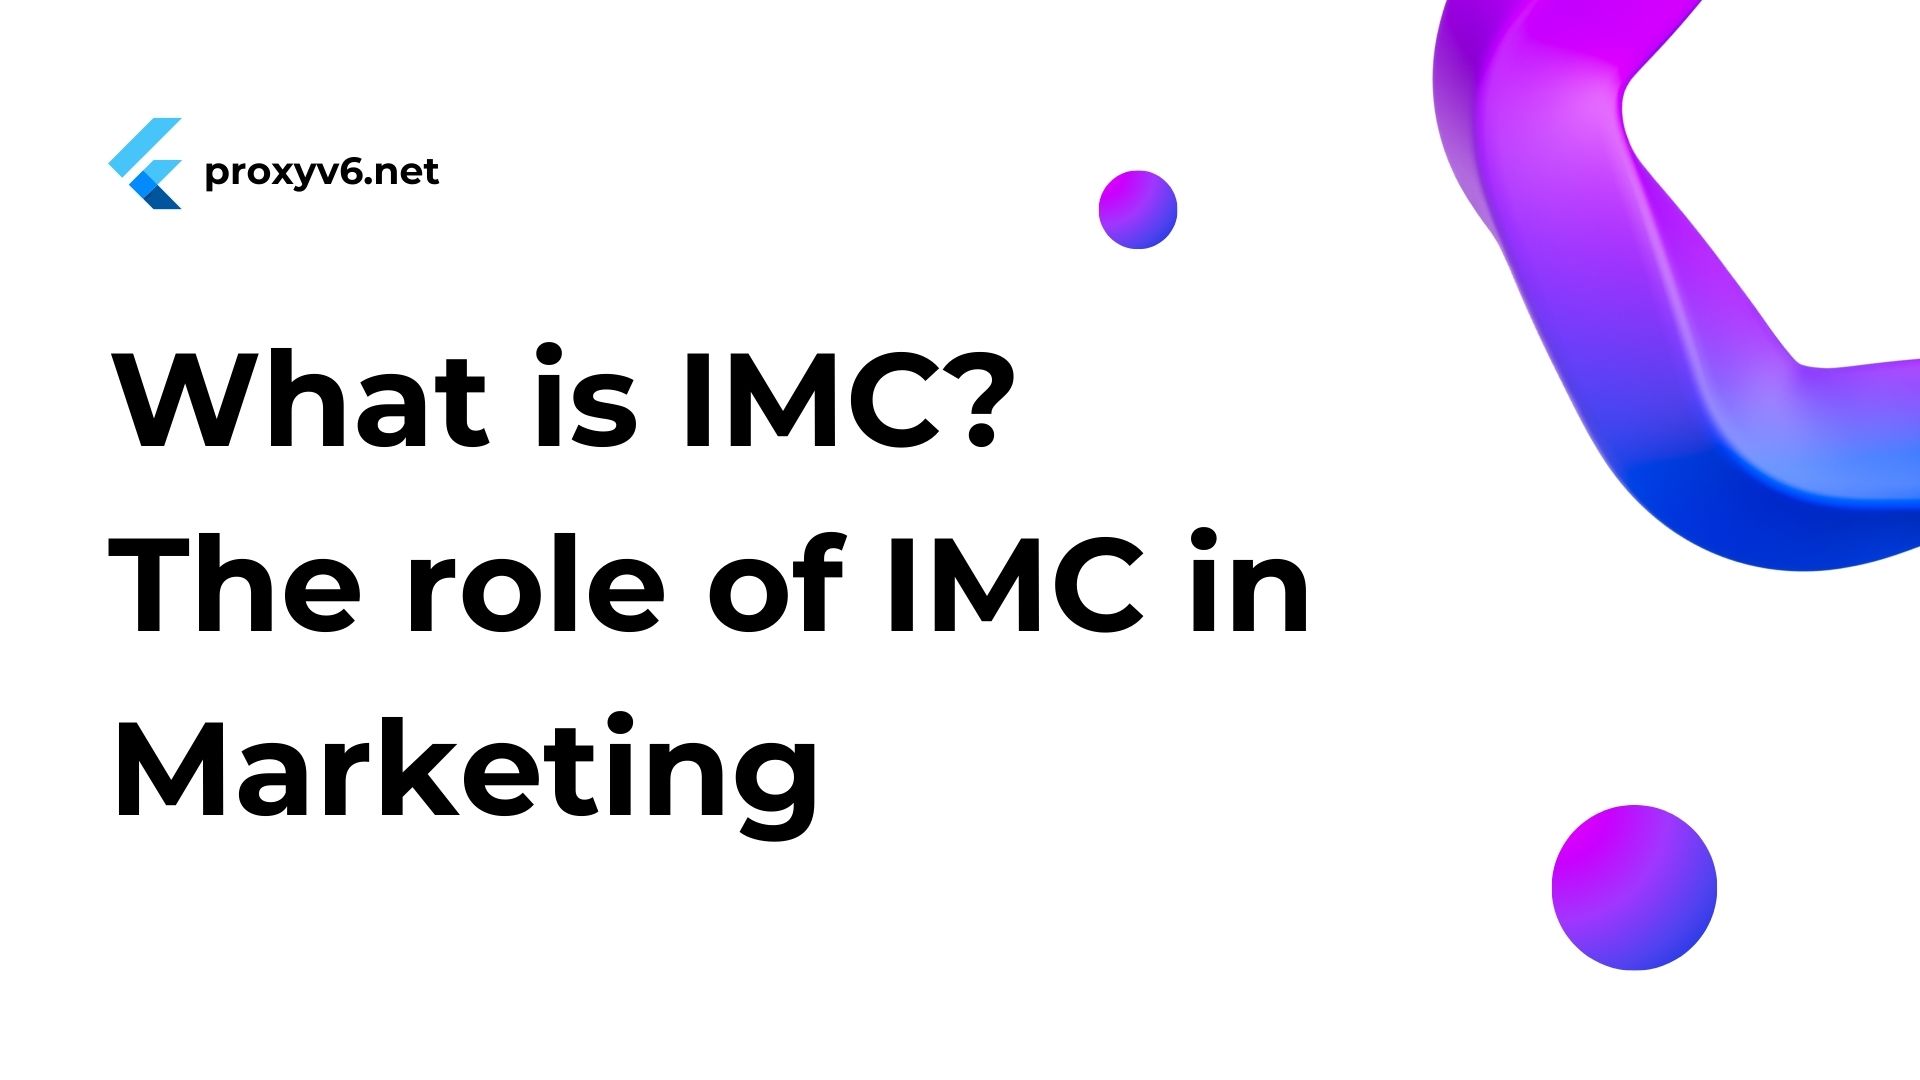 What is IMC? The role of IMC in marketing